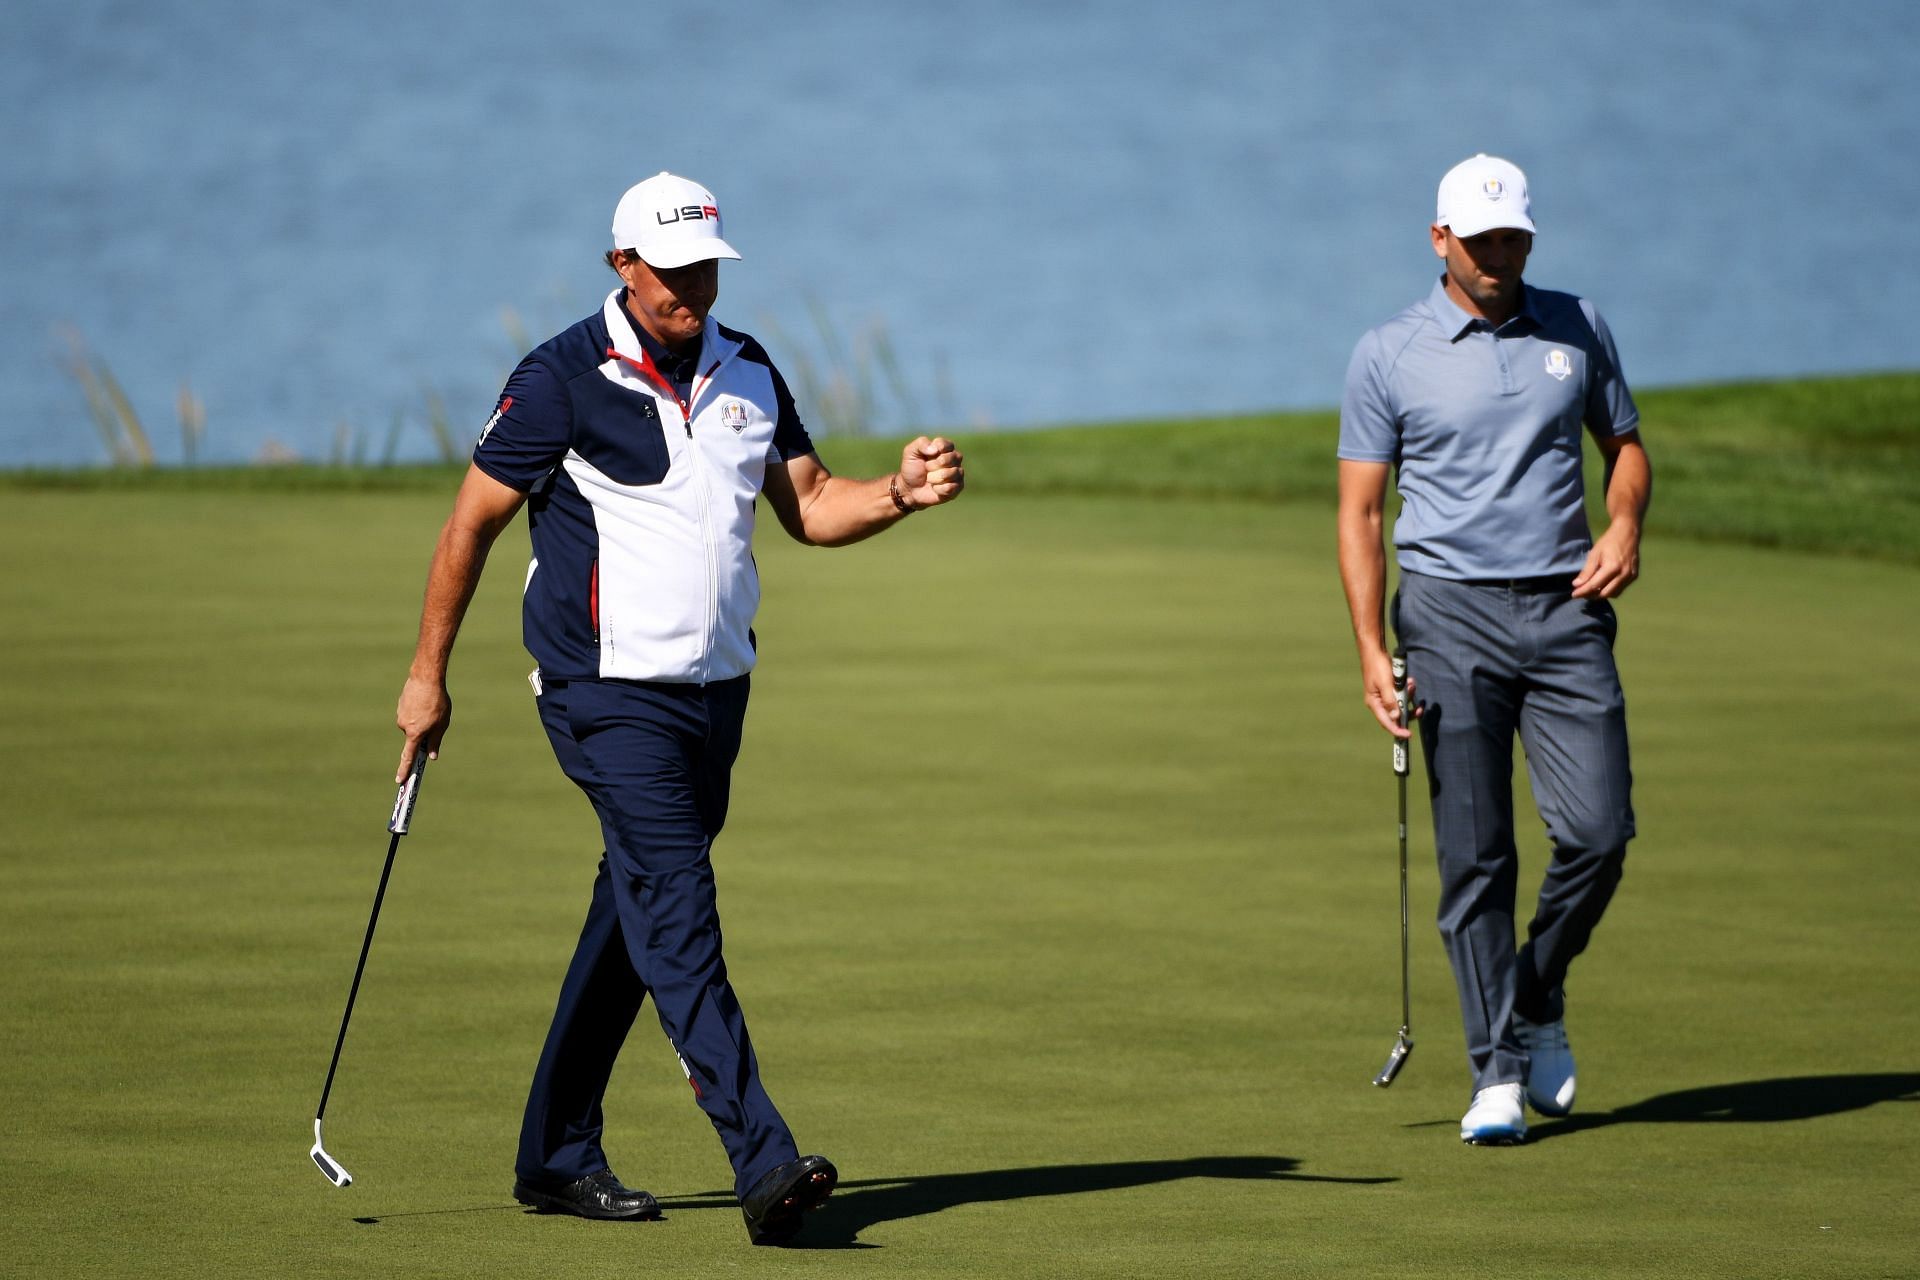 Phil Mickelson and Sergio Garcia at the 2016 Ryder Cup (Image via Getty).